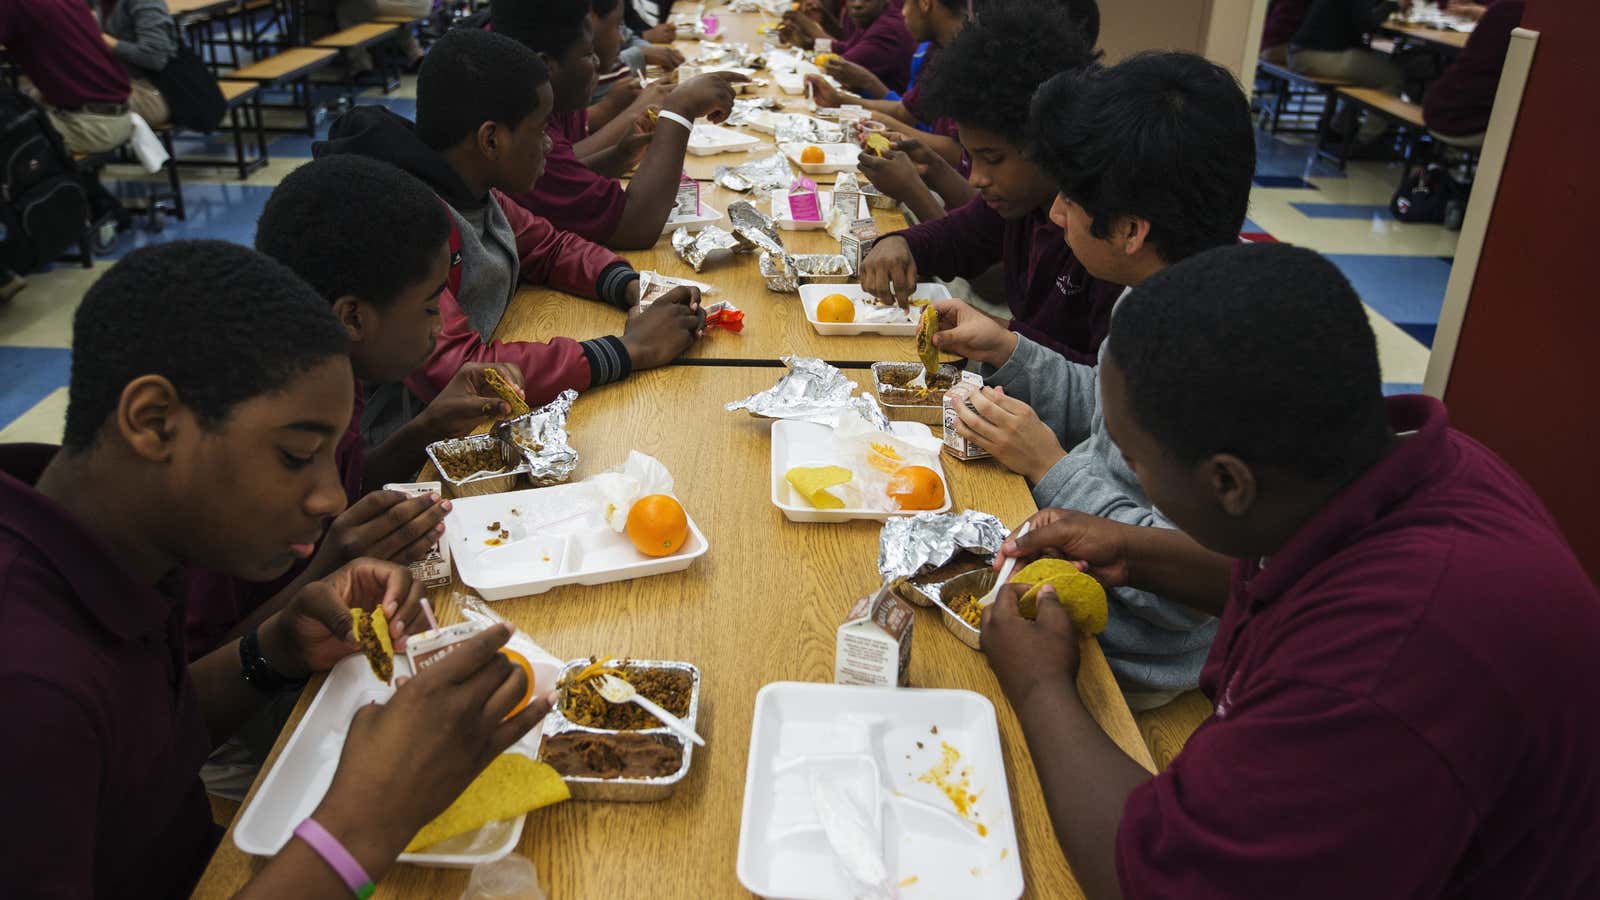 School lunch menus rely disproportionately on carbon-intensive animal products.